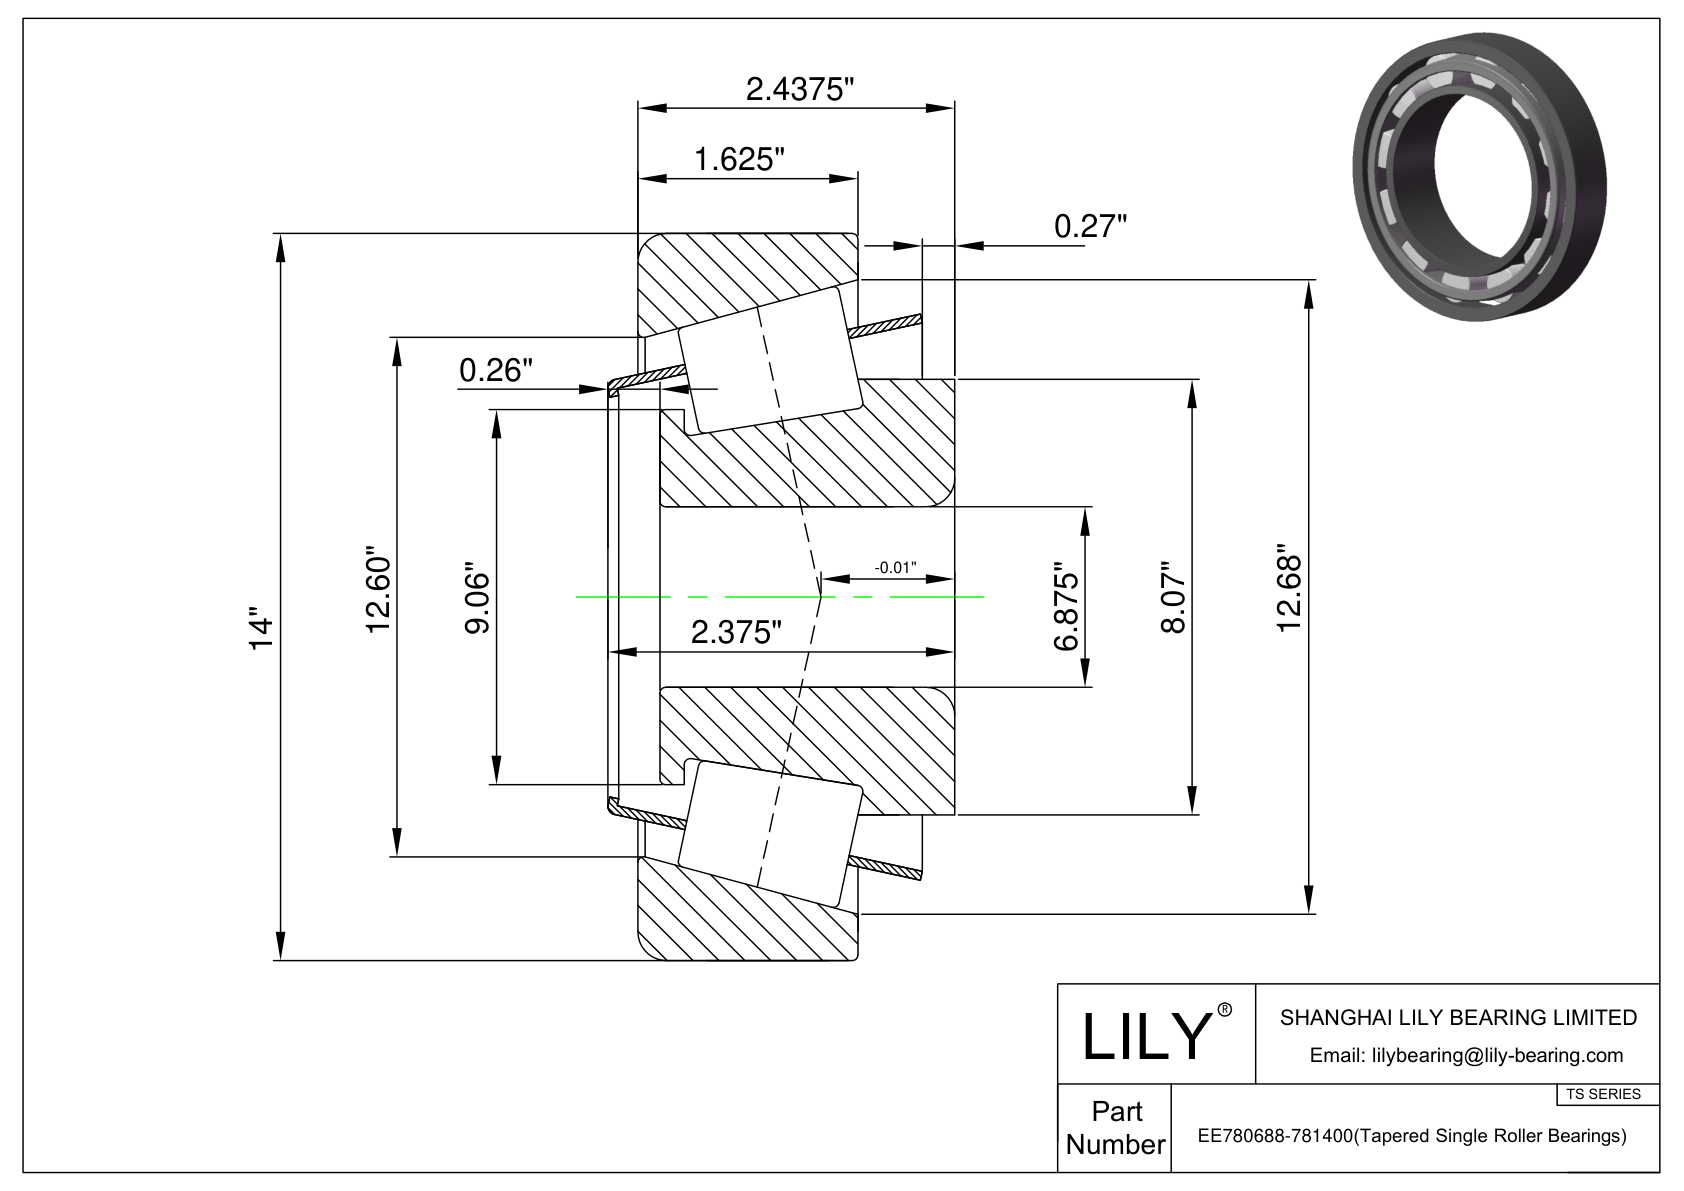 EE780688-781400 TS (Tapered Single Roller Bearings) (Imperial) cad drawing